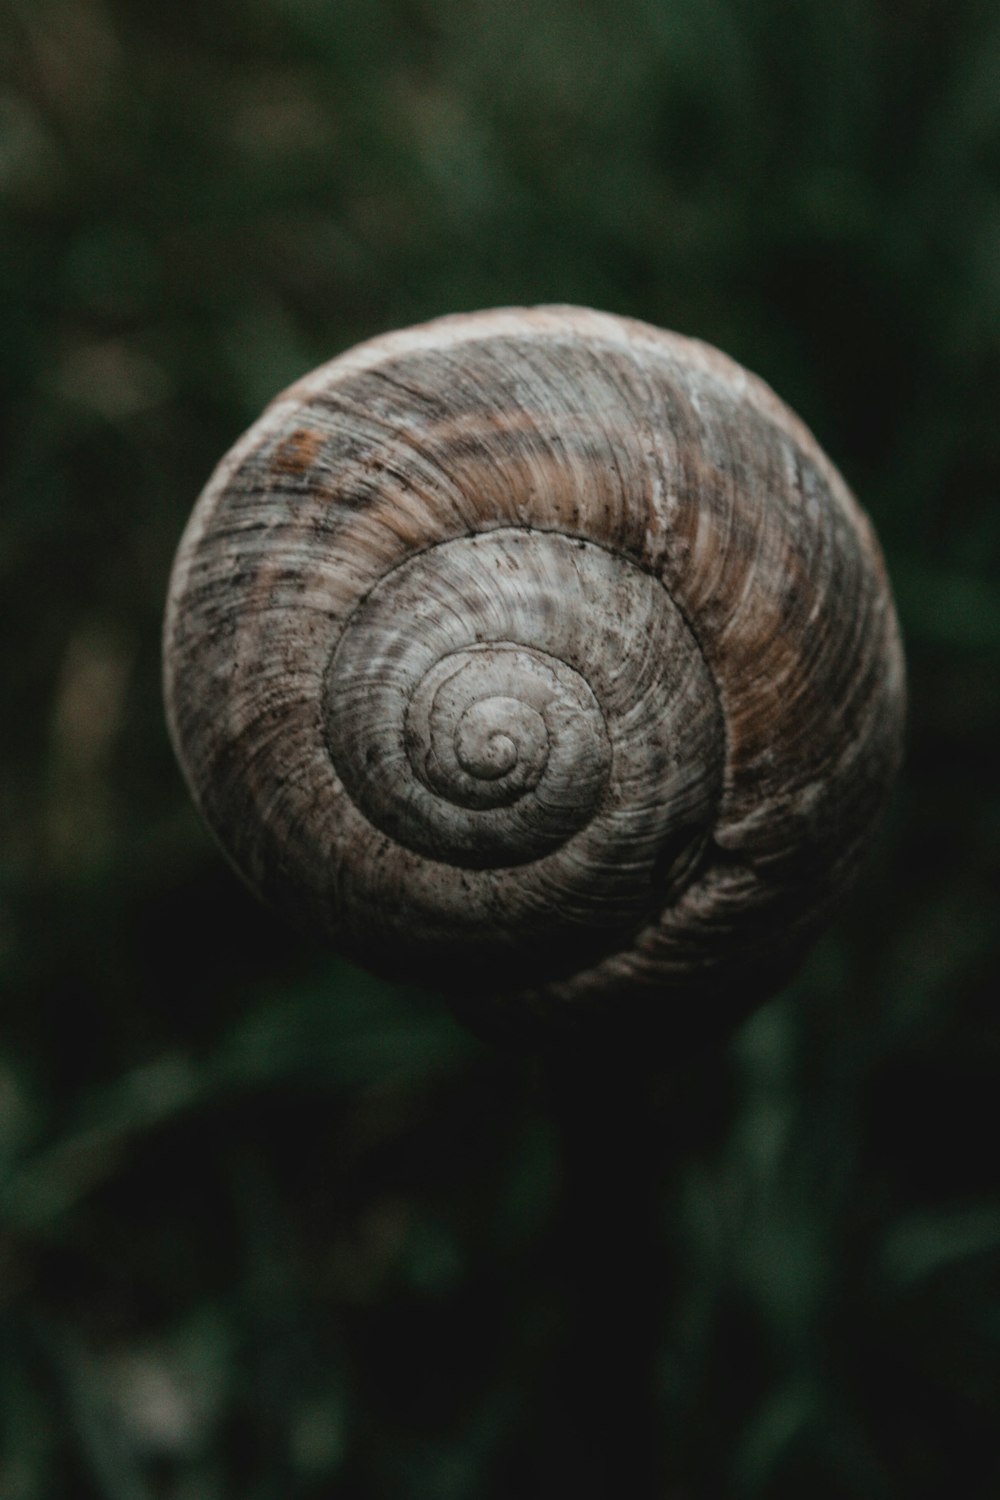 a close up of a snail's shell